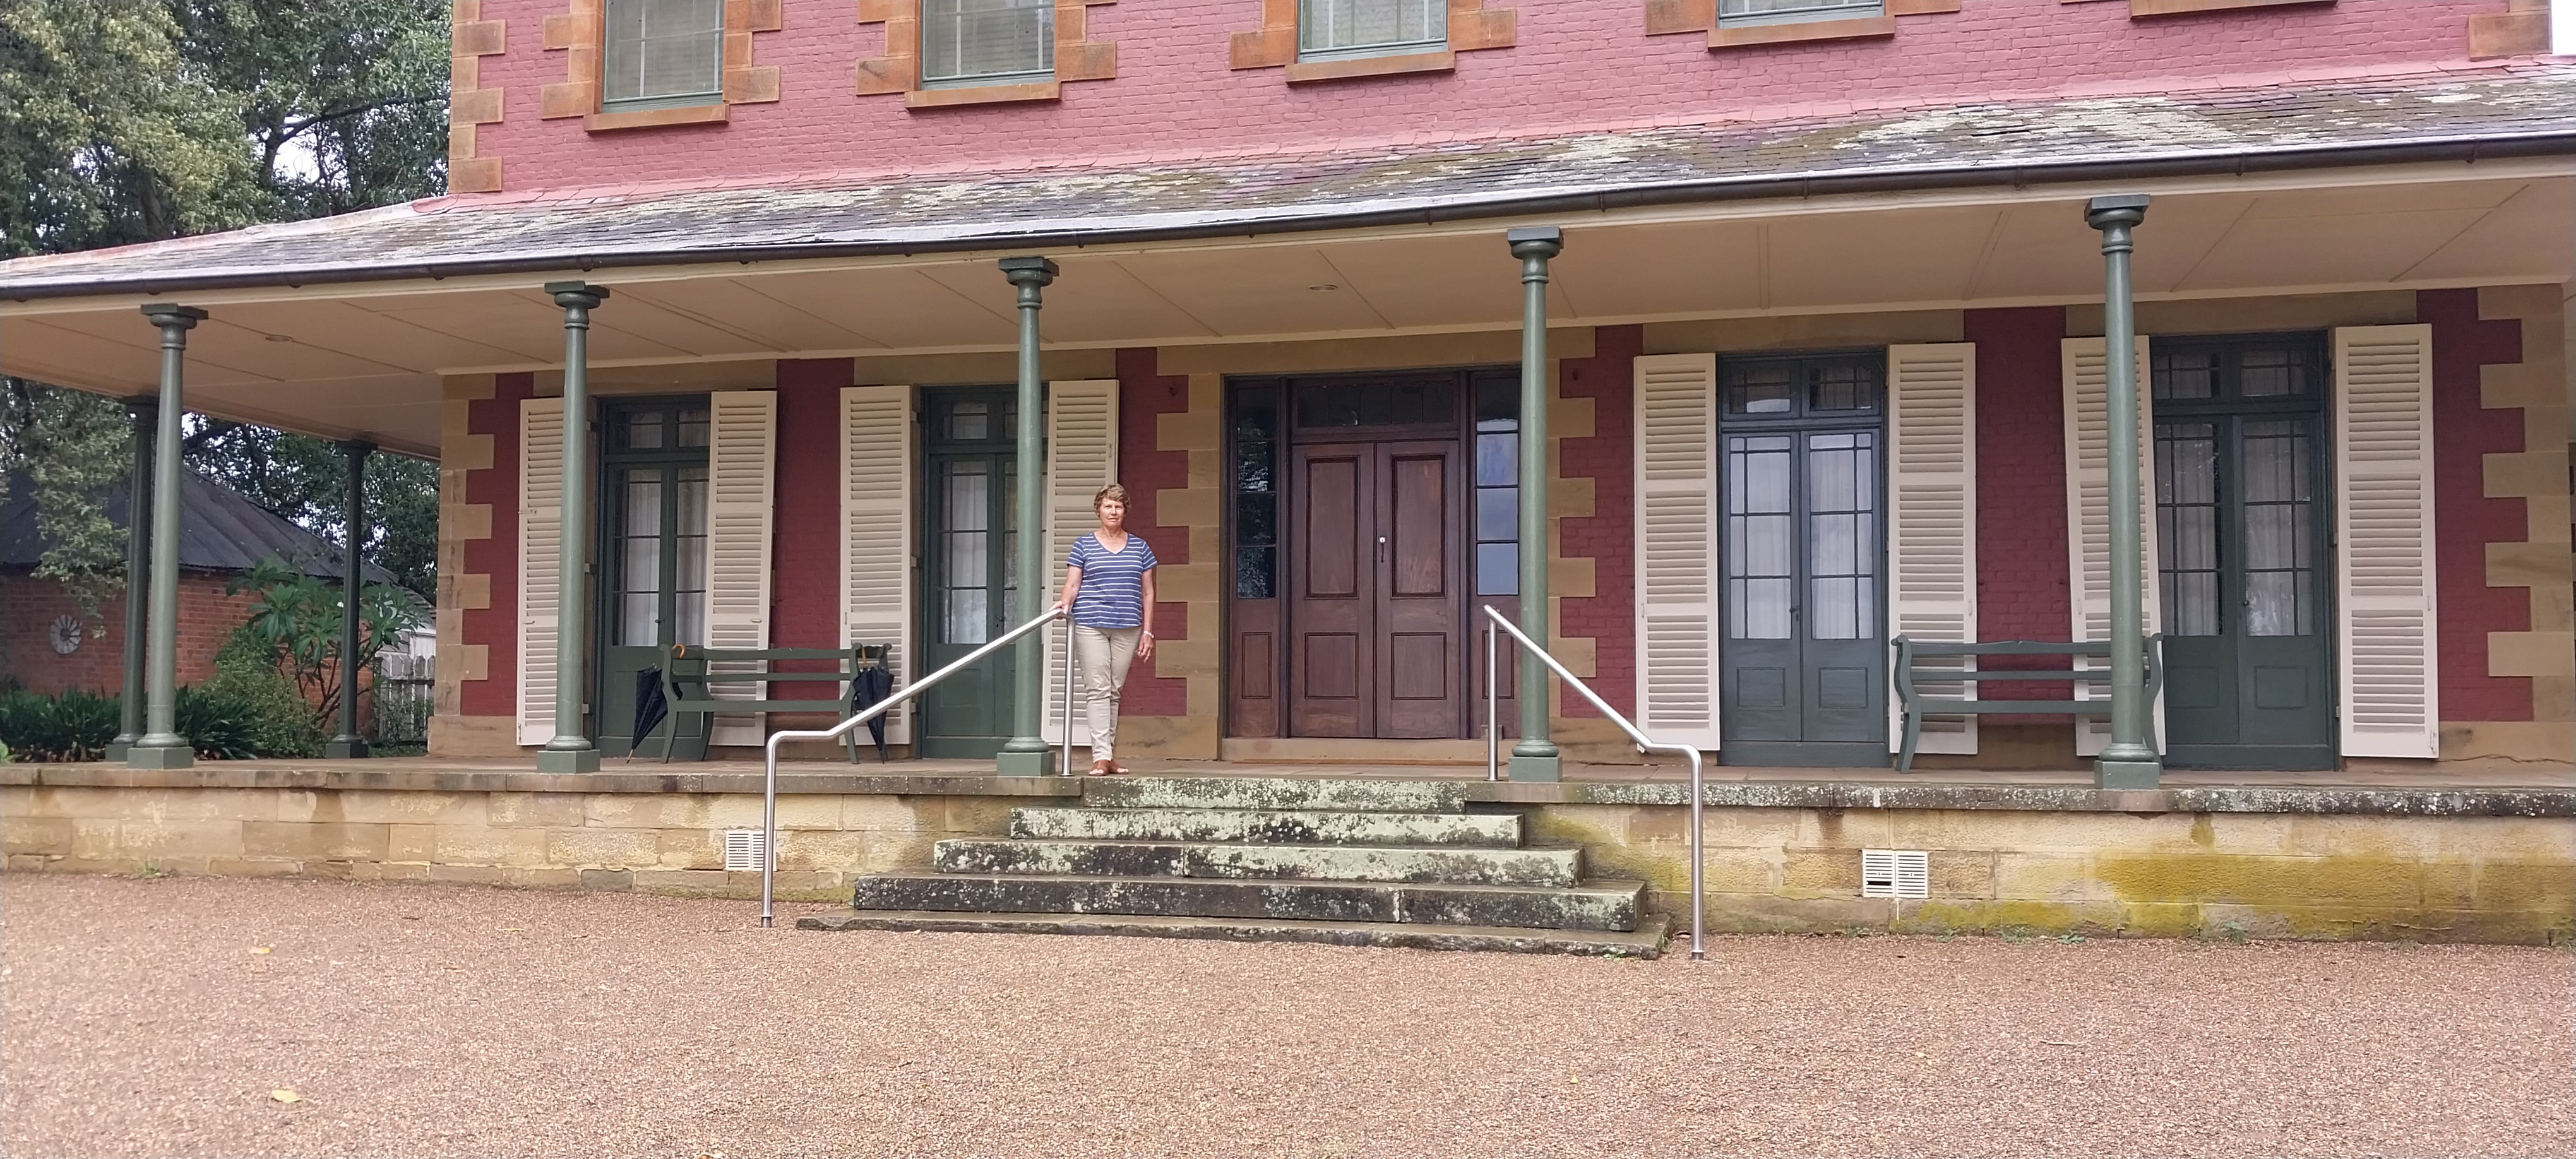 Tocal Homestead: 200 Years of Agriculture in the Hunter